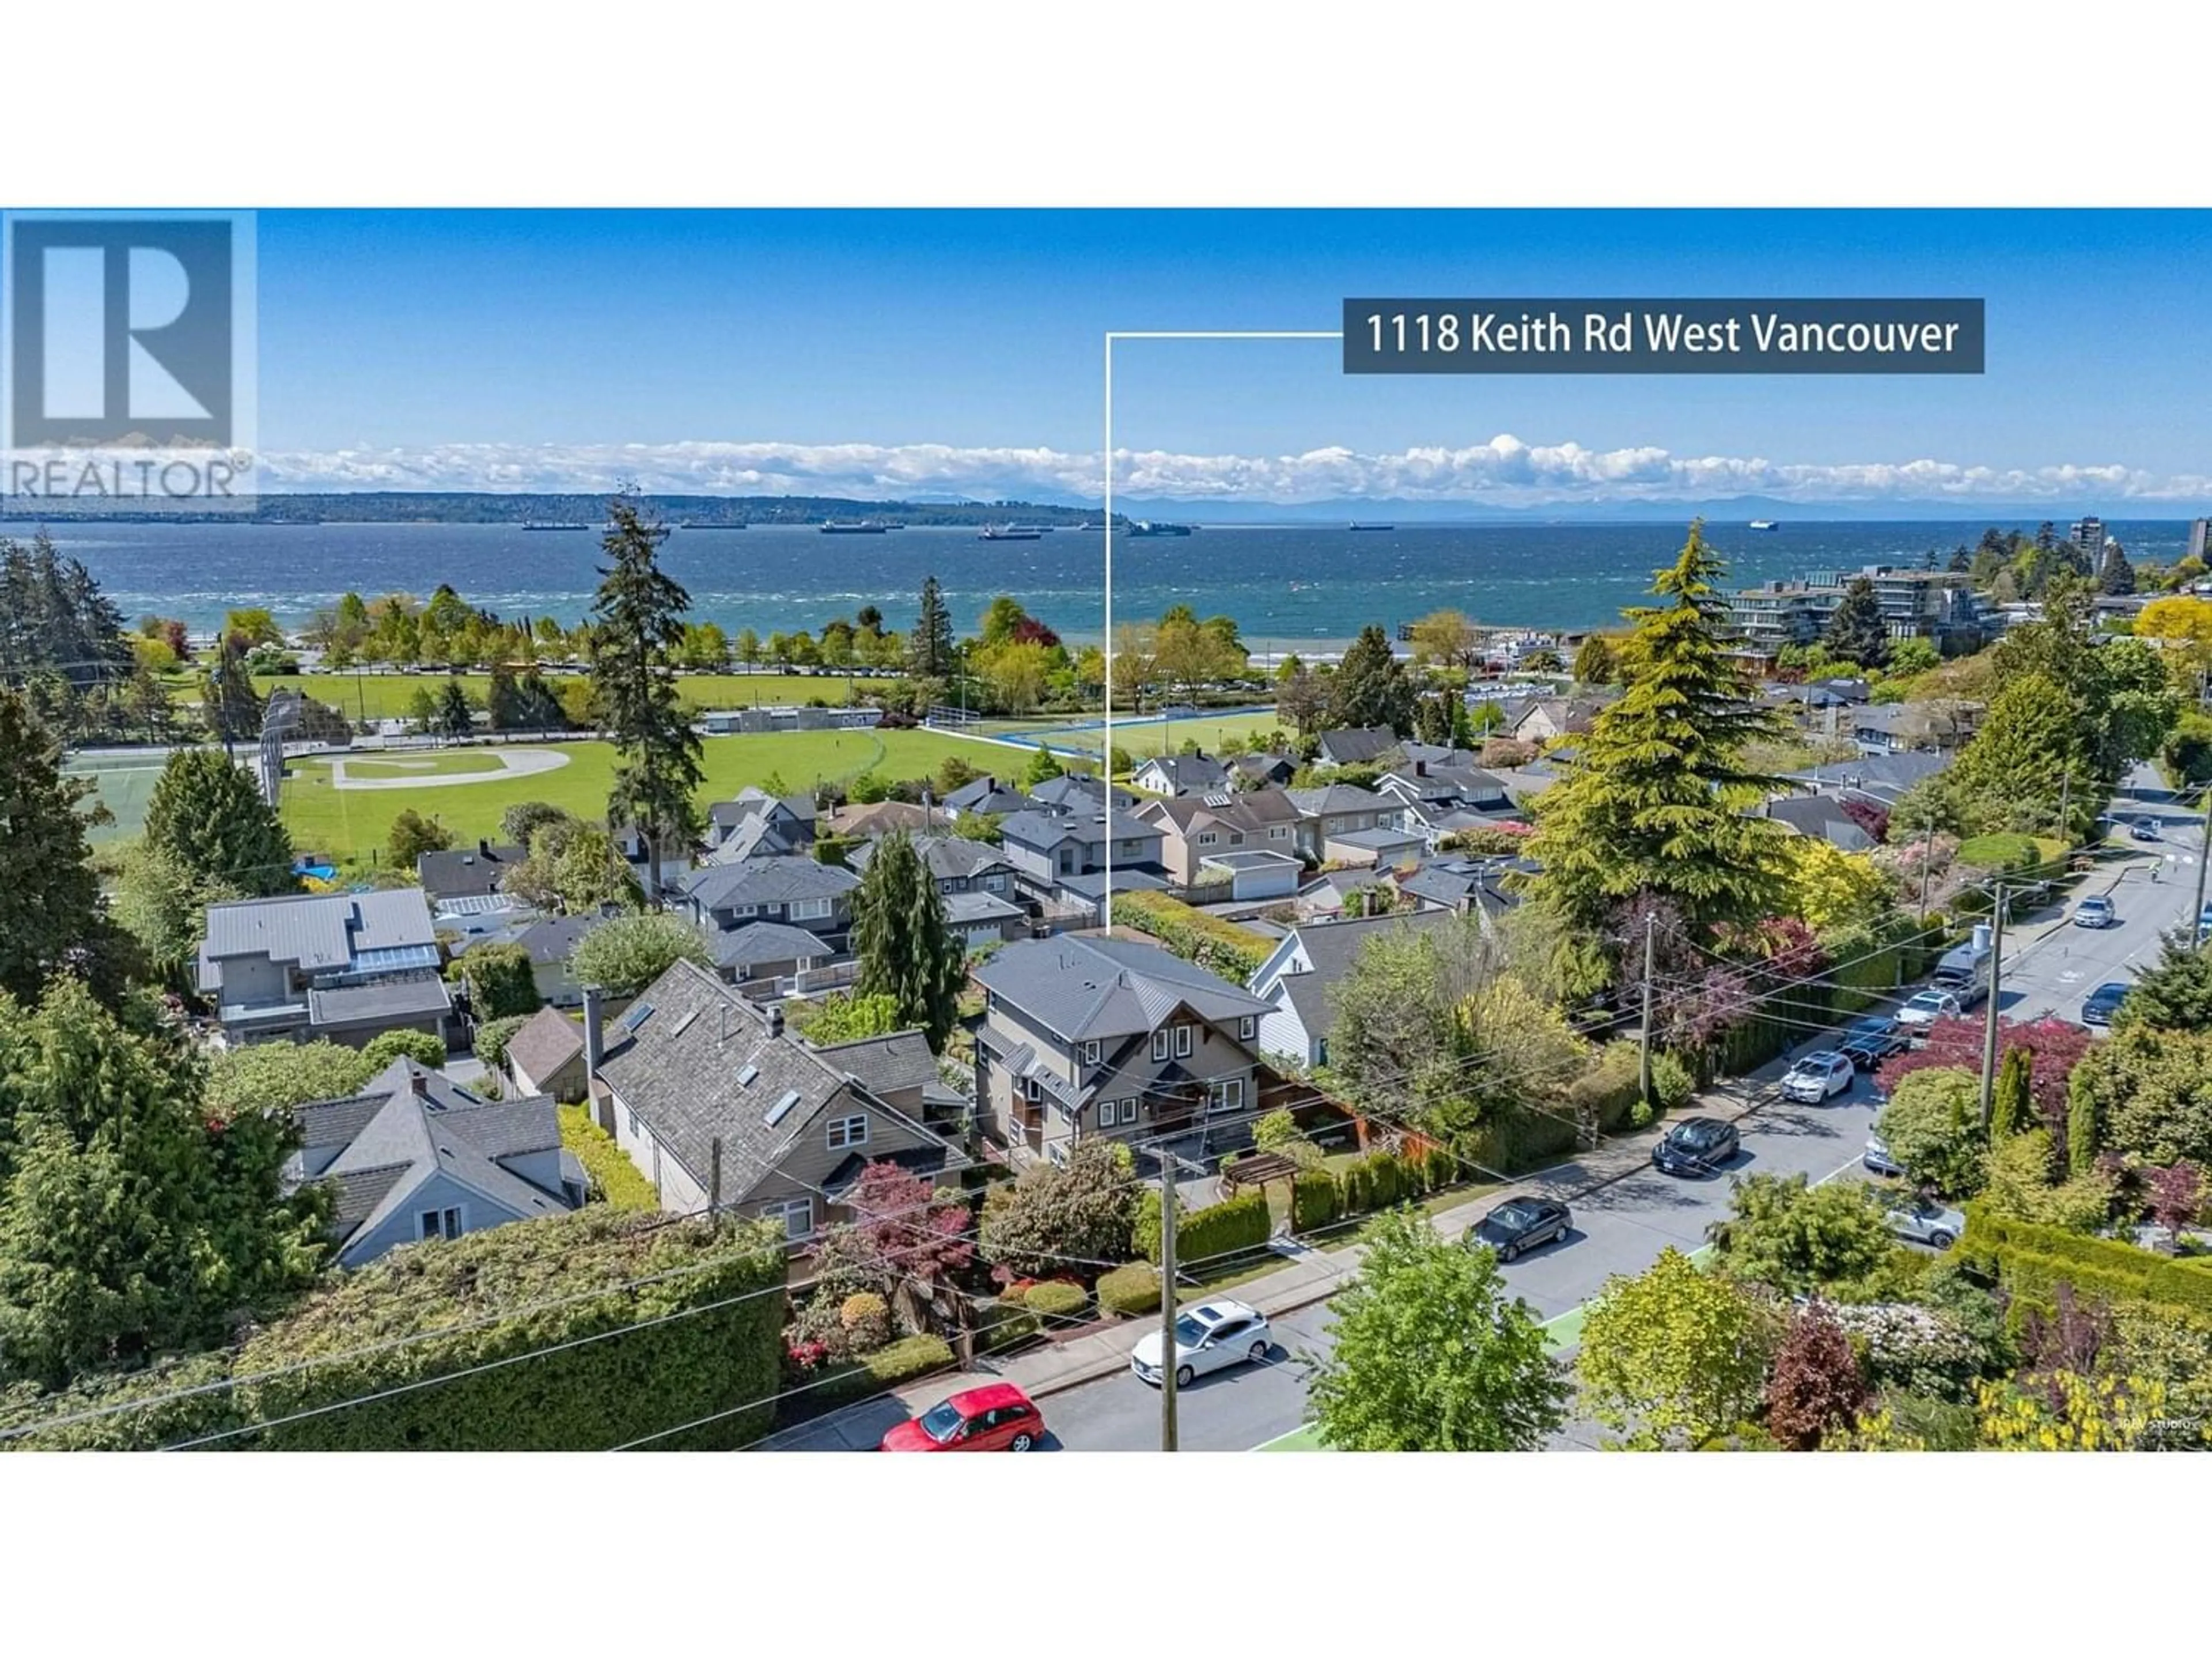 Lakeview for 1118 KEITH ROAD, West Vancouver British Columbia V7T1M8